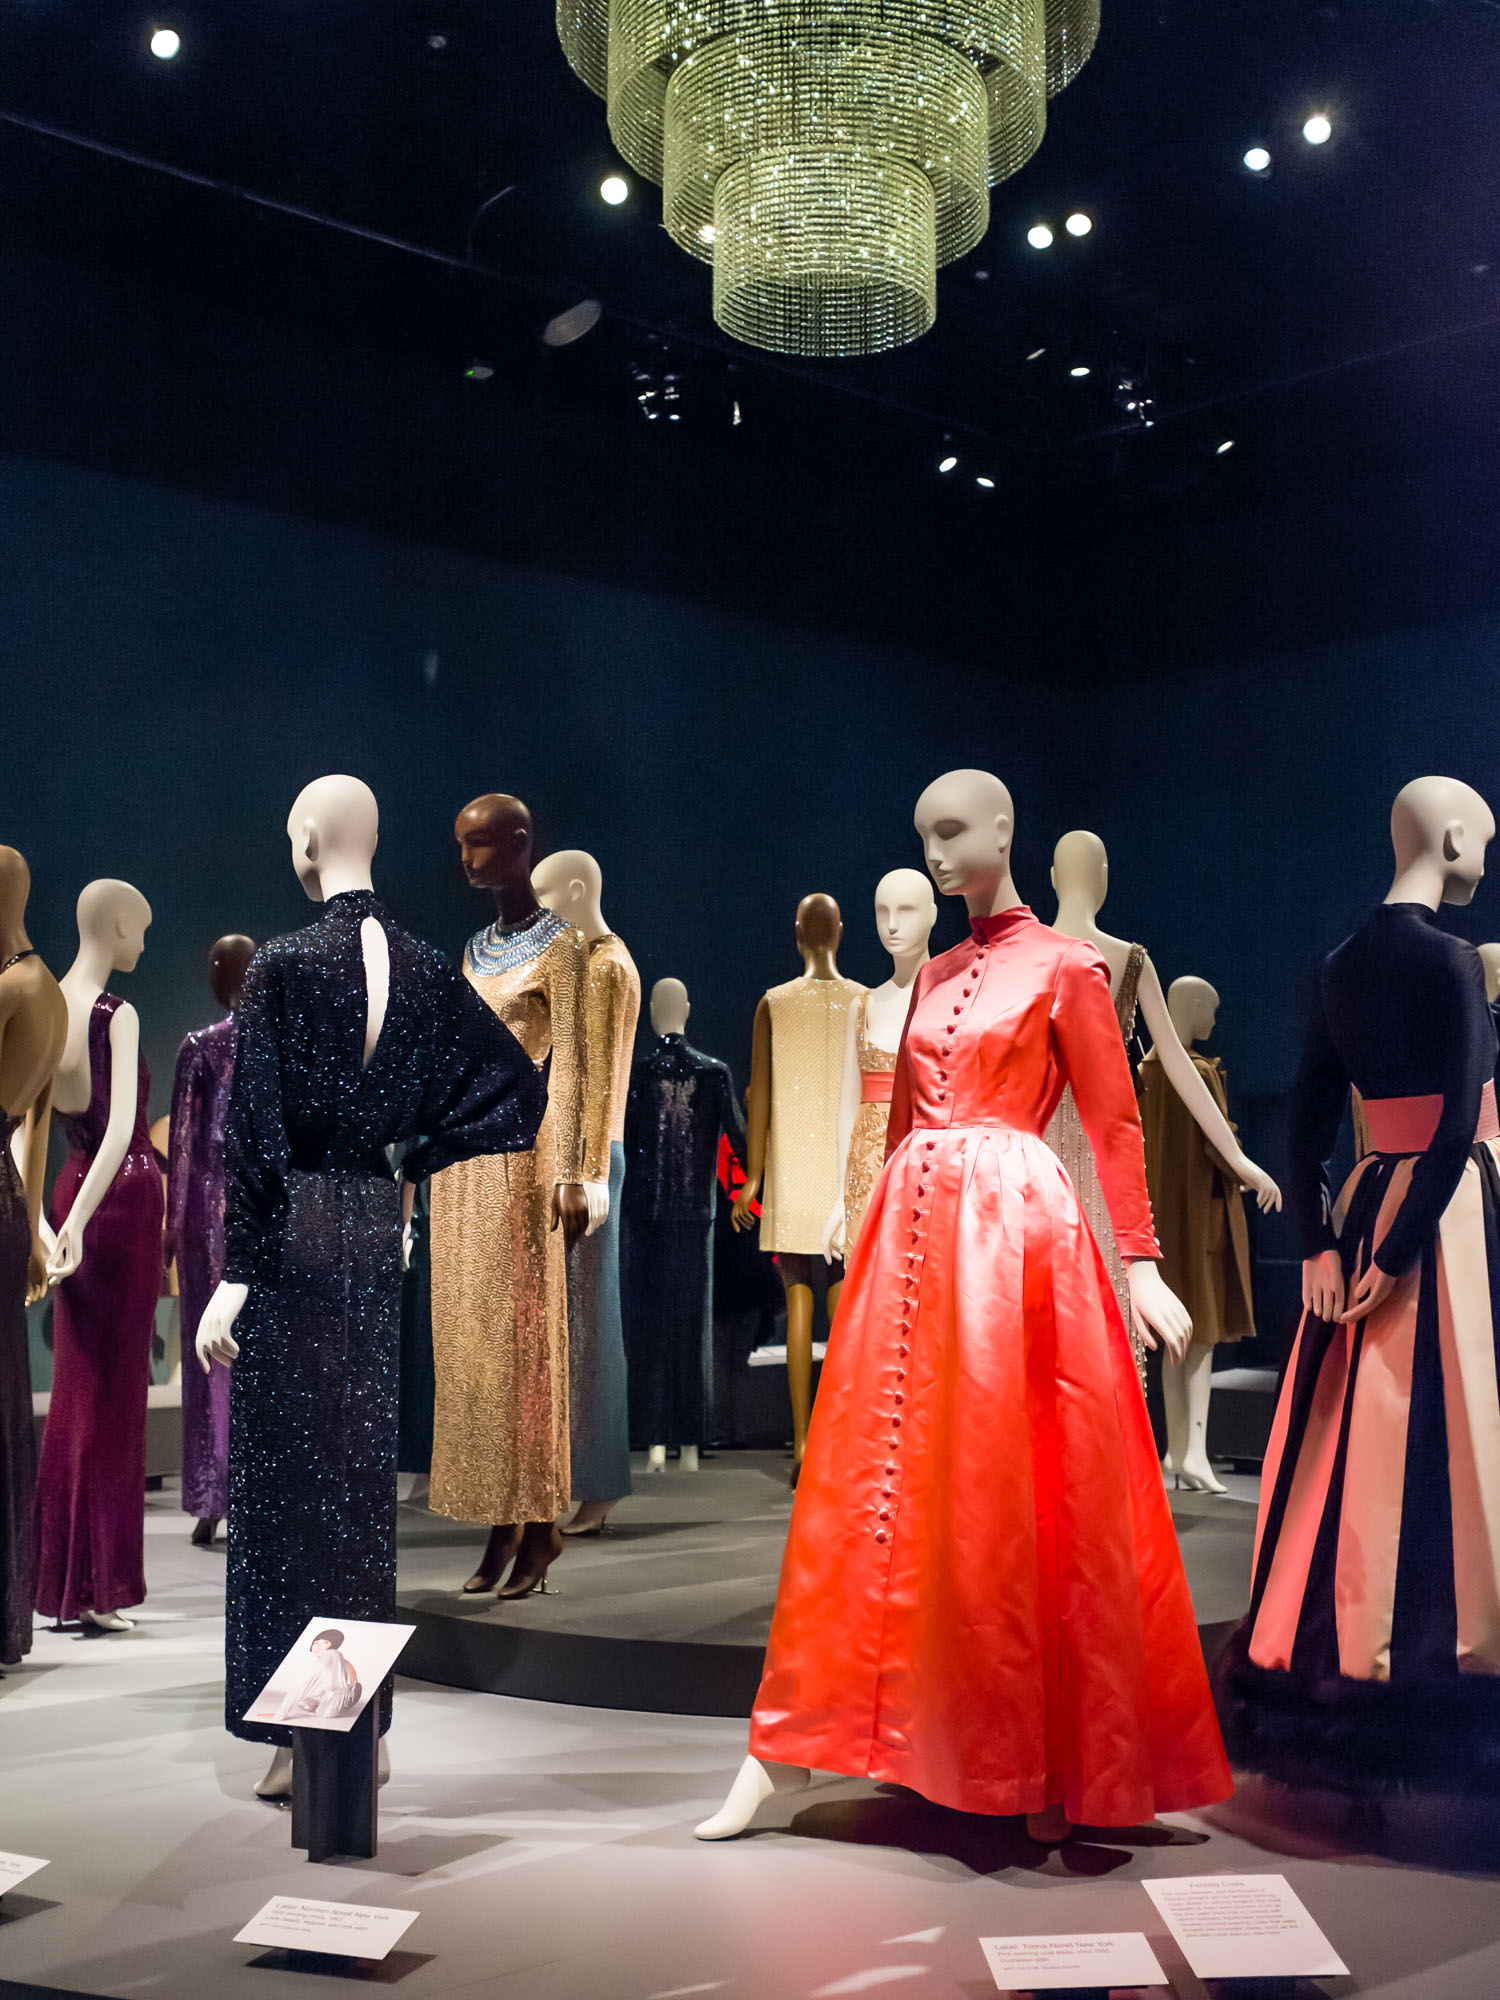 Ready-to-wear outfits by designer Norman Norell in the Museum at FIT.